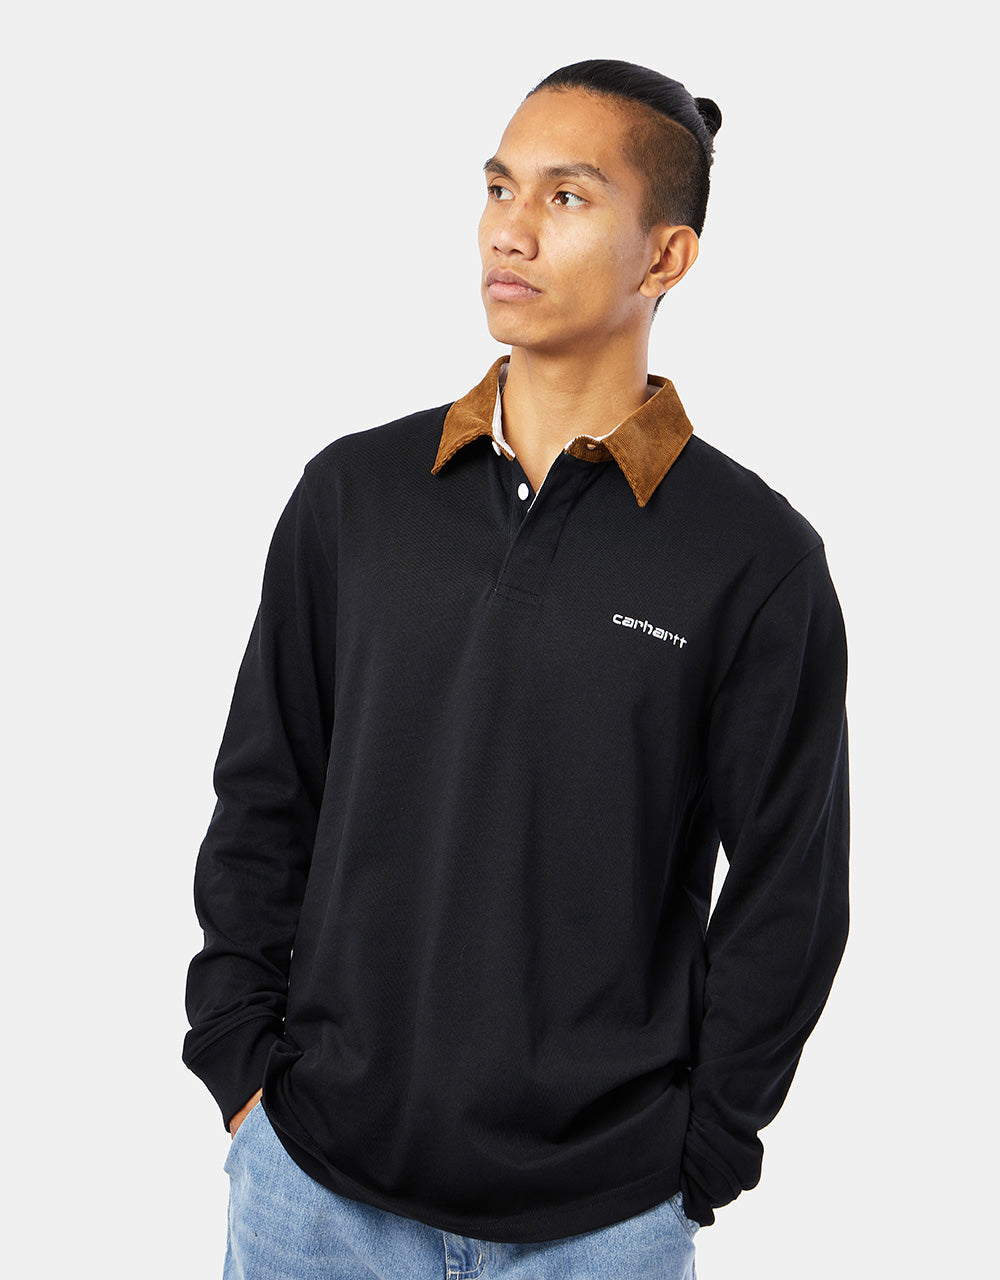 Carhartt WIP L/S Cord Rugby Polo - Black/H Brown/White – Route One